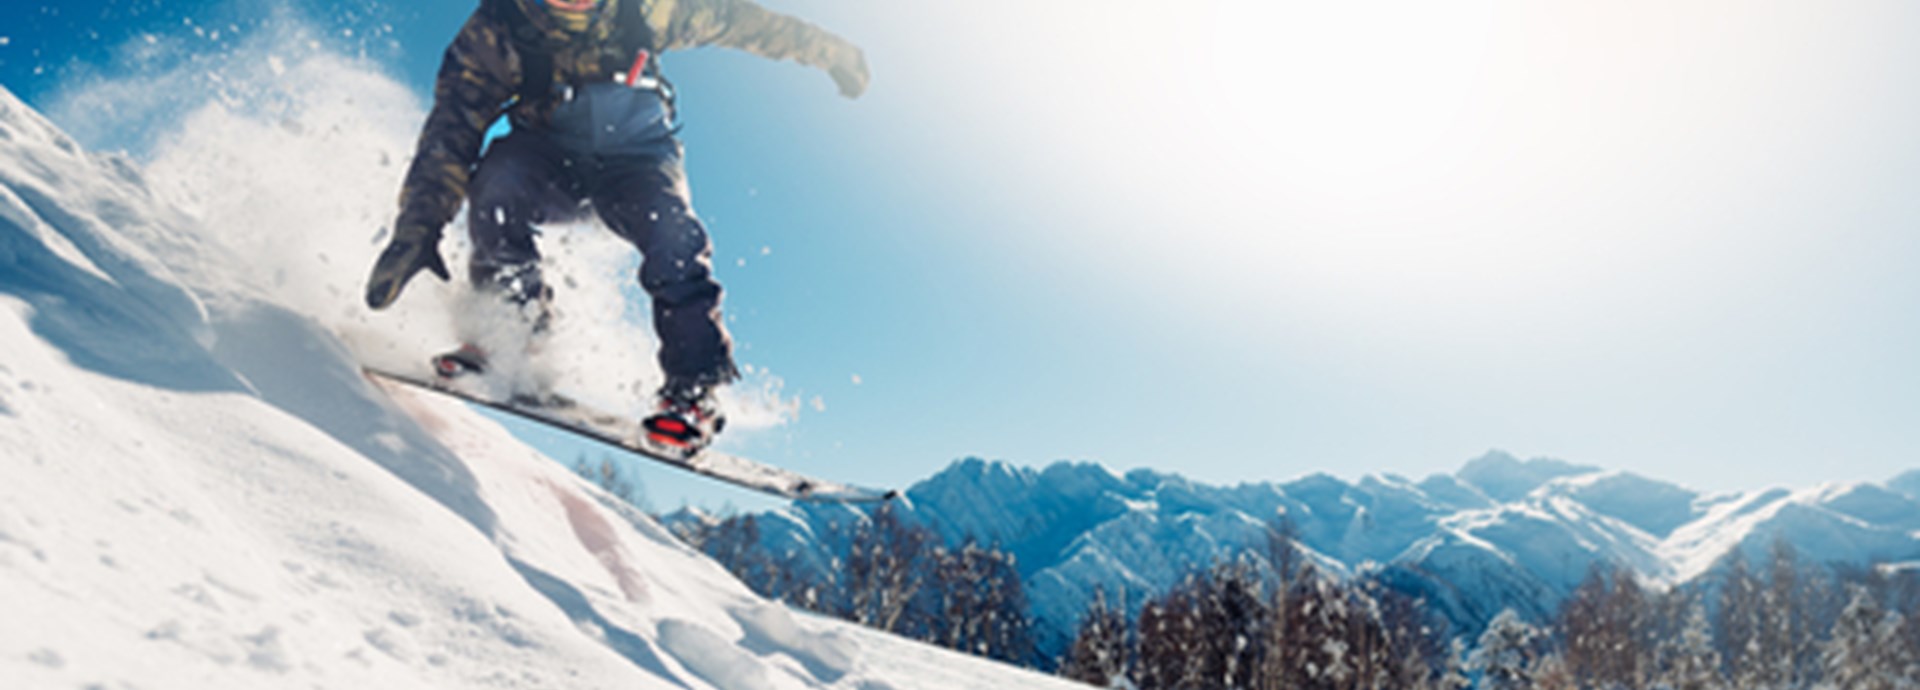 snowboarder is jumping with snowboard from snowhill on holidays